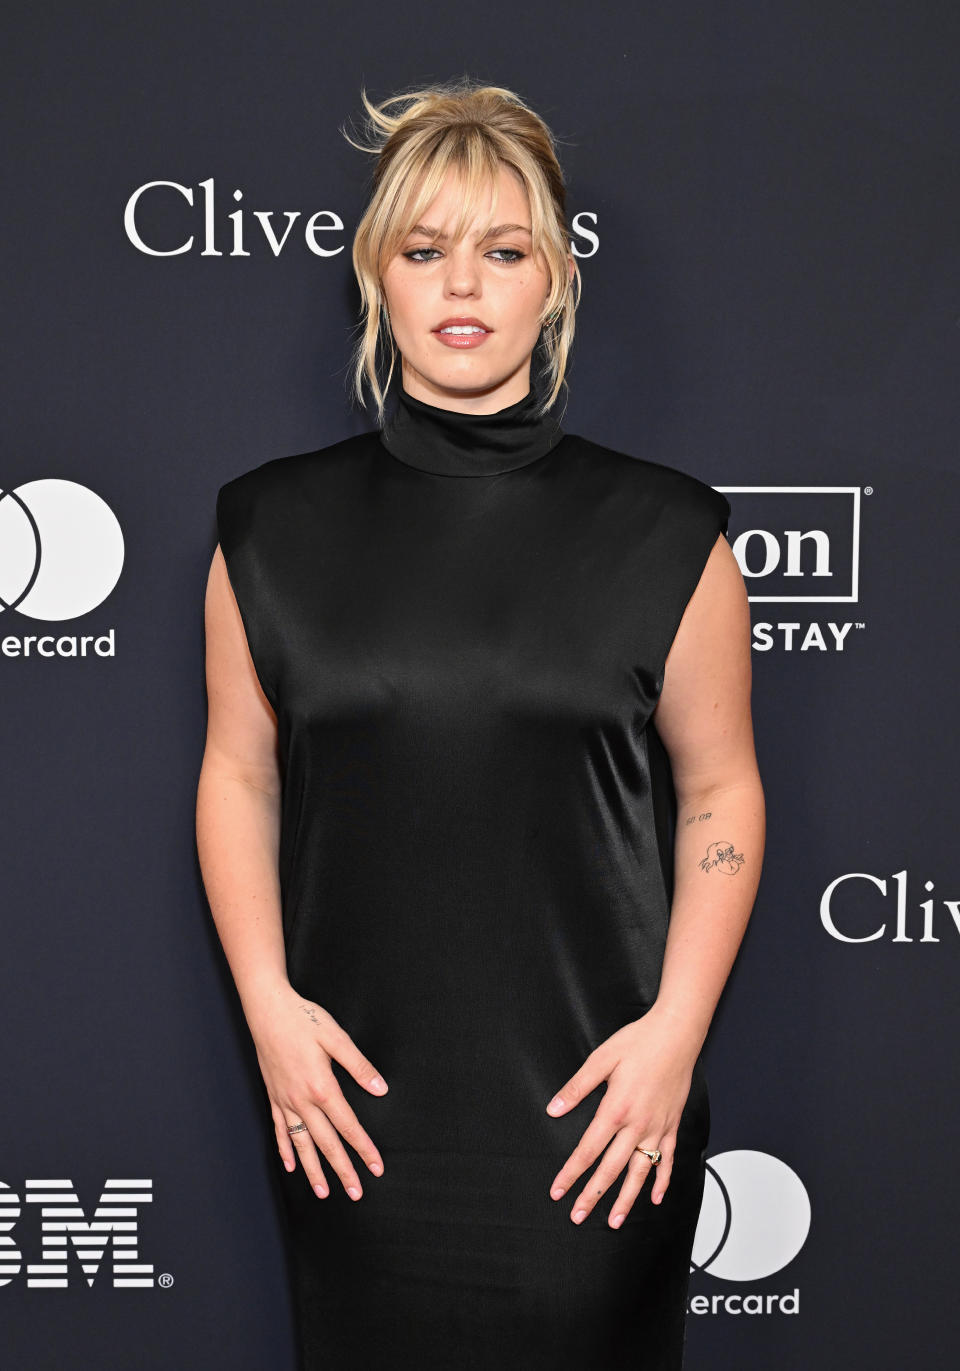 Reneé in a sleeveless turtleneck dress posing on red carpet; she wears minimal jewelry and has a tattoo on her arm